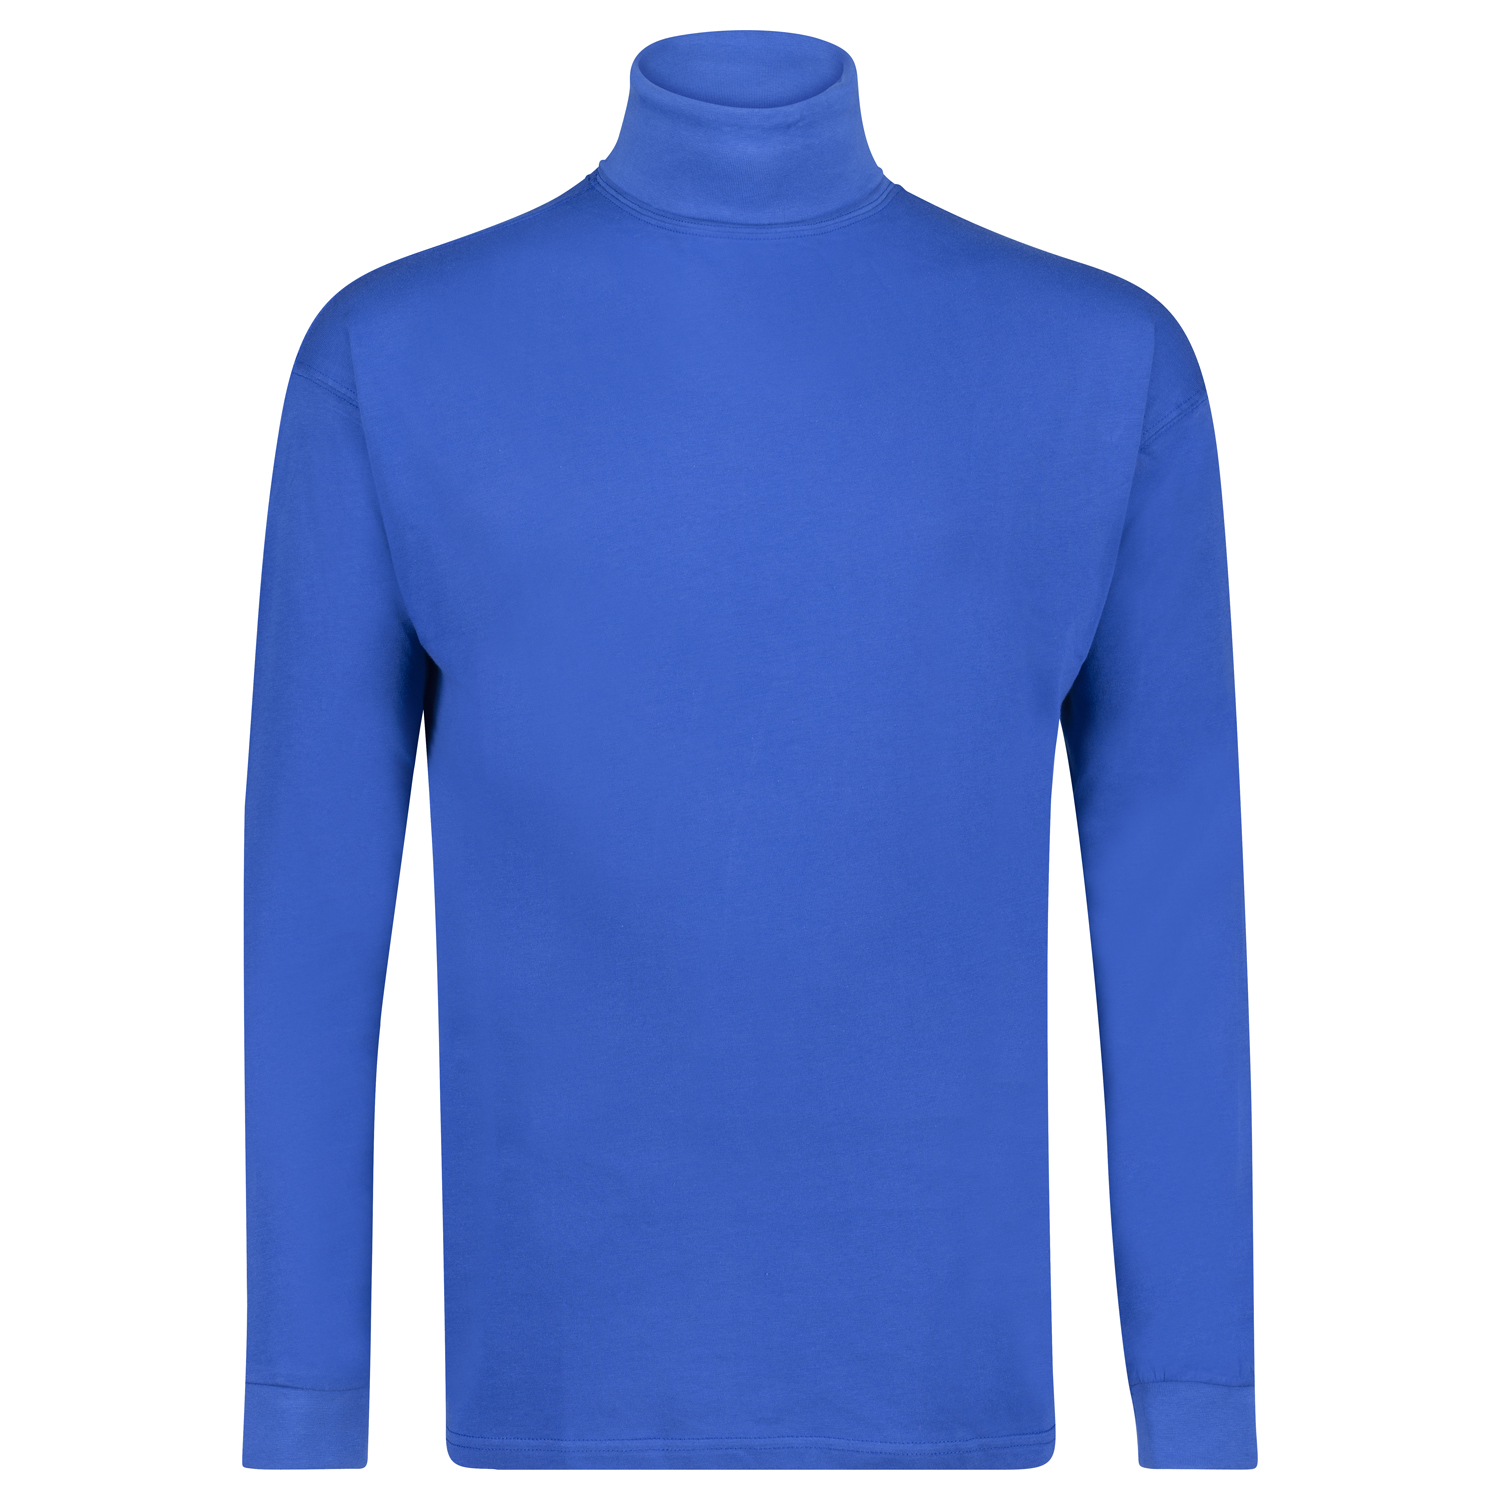 ADAMO longsleeve for men COMFORT FIT in royal blue with turtle neck up to size 12XL